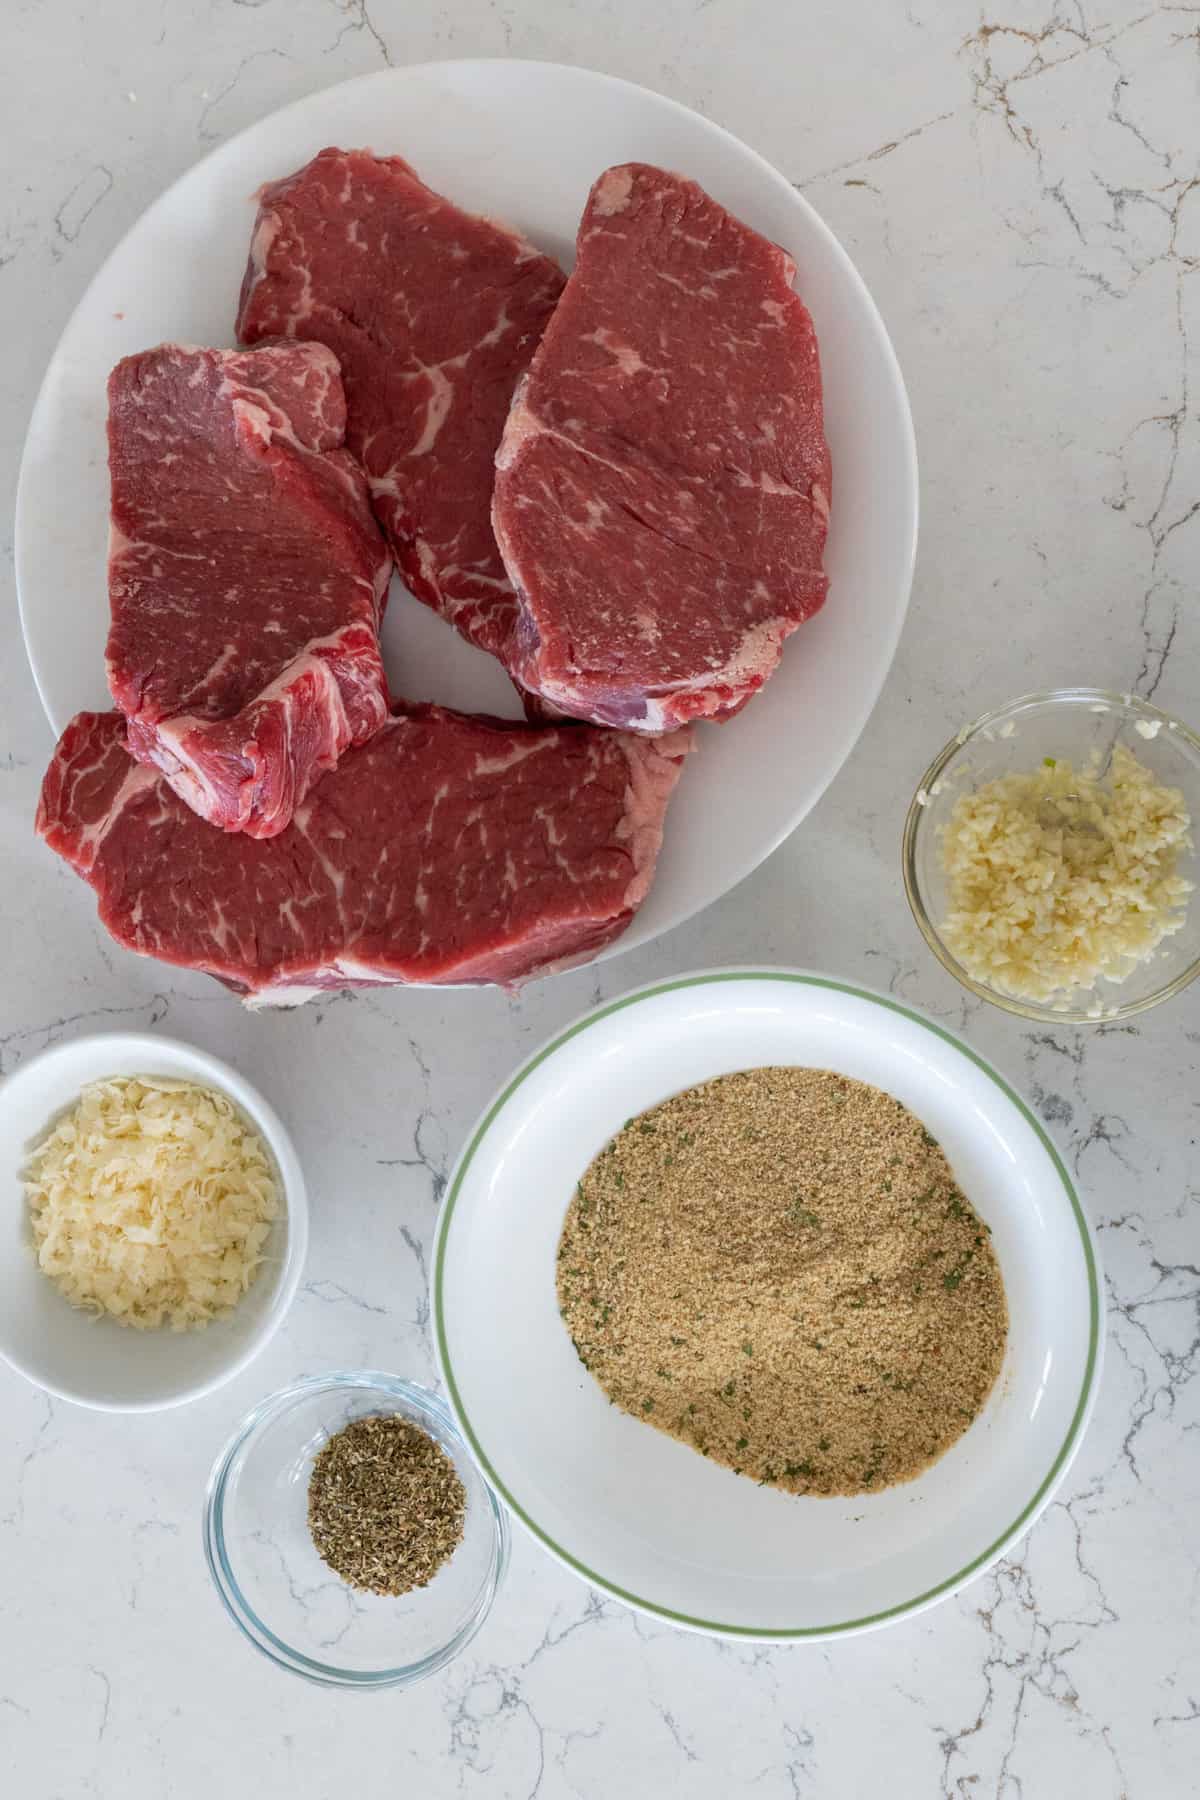 This Italian Breaded Steak is made with shell steaks, olive oil, garlic cloves, dried bread crumbs, parmesan, dried oregano and broiled.